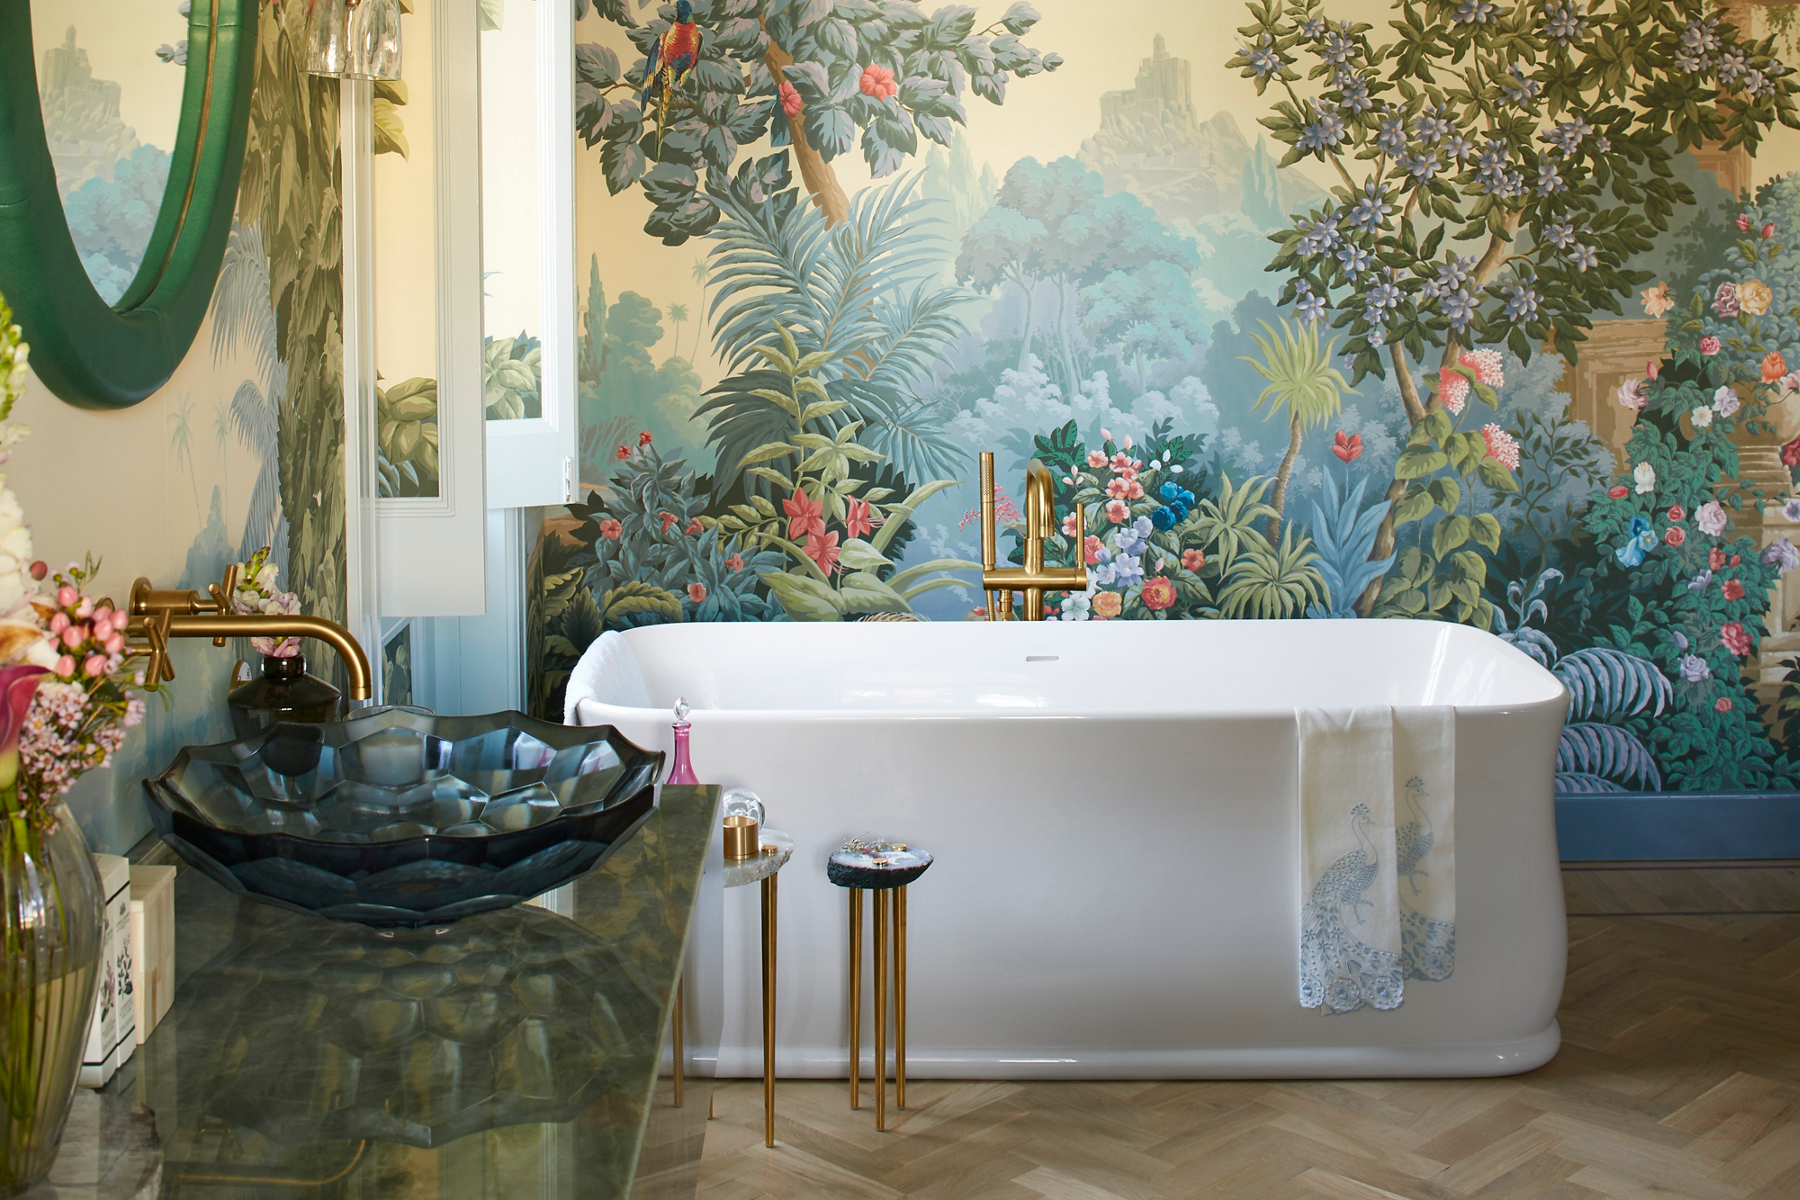 A romantic bathroom with a landscape mural, white KOHLER freestanding bath, Artist Editions Briolette glass sink, and Purist faucet and tub filler.